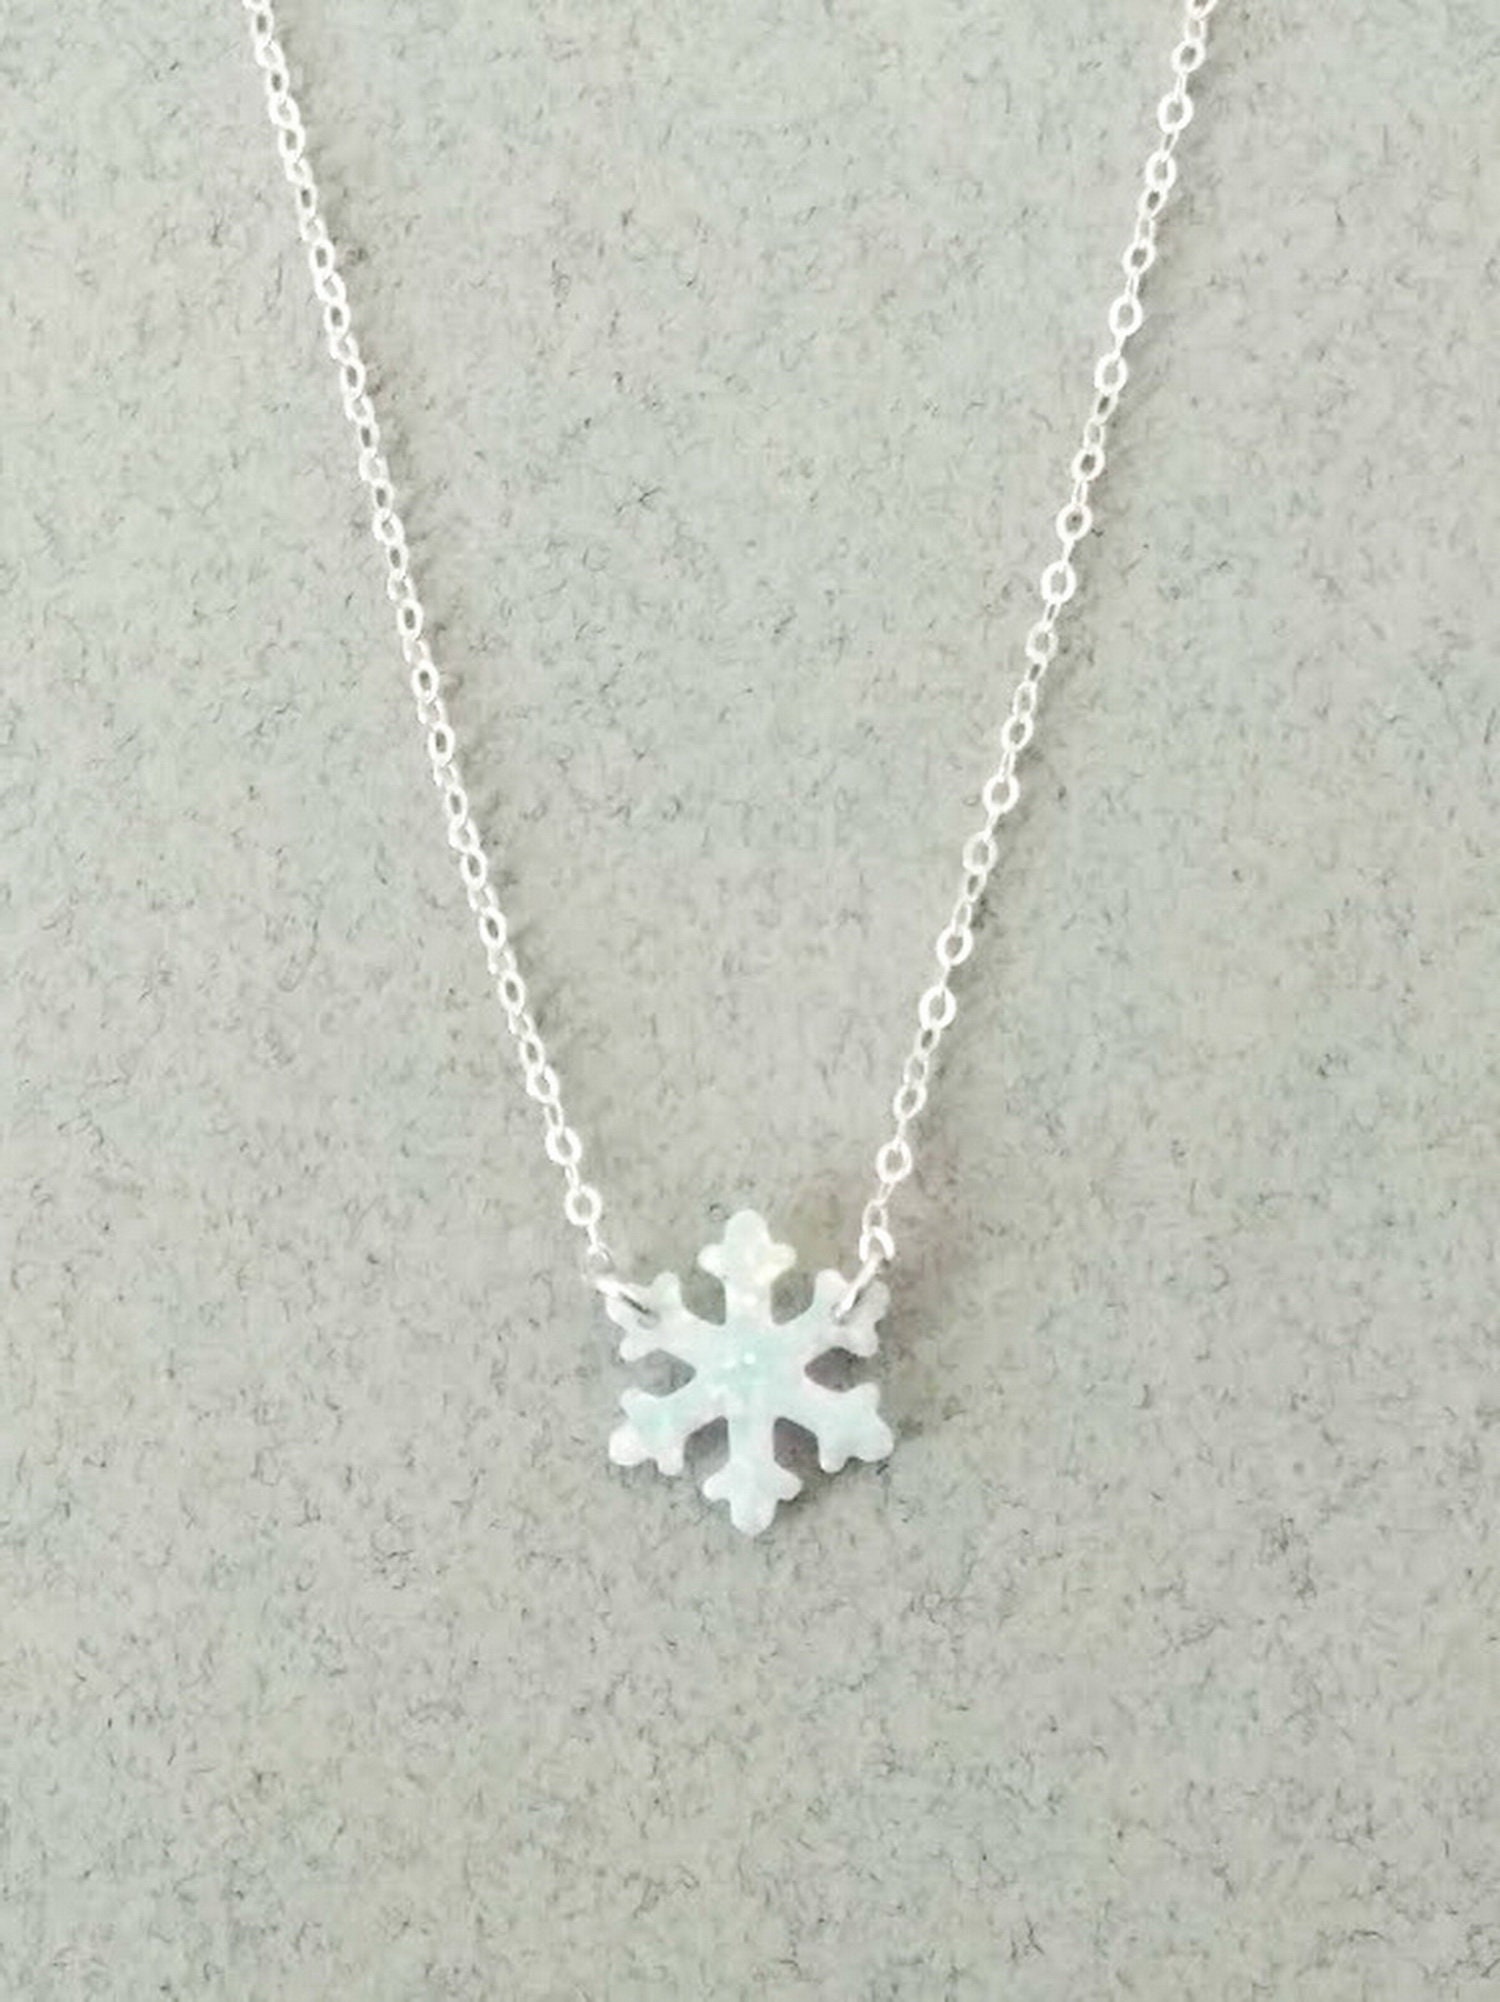 Snowflake Necklace Snowflake Jewelry Opal Jewelry for Woman | Etsy